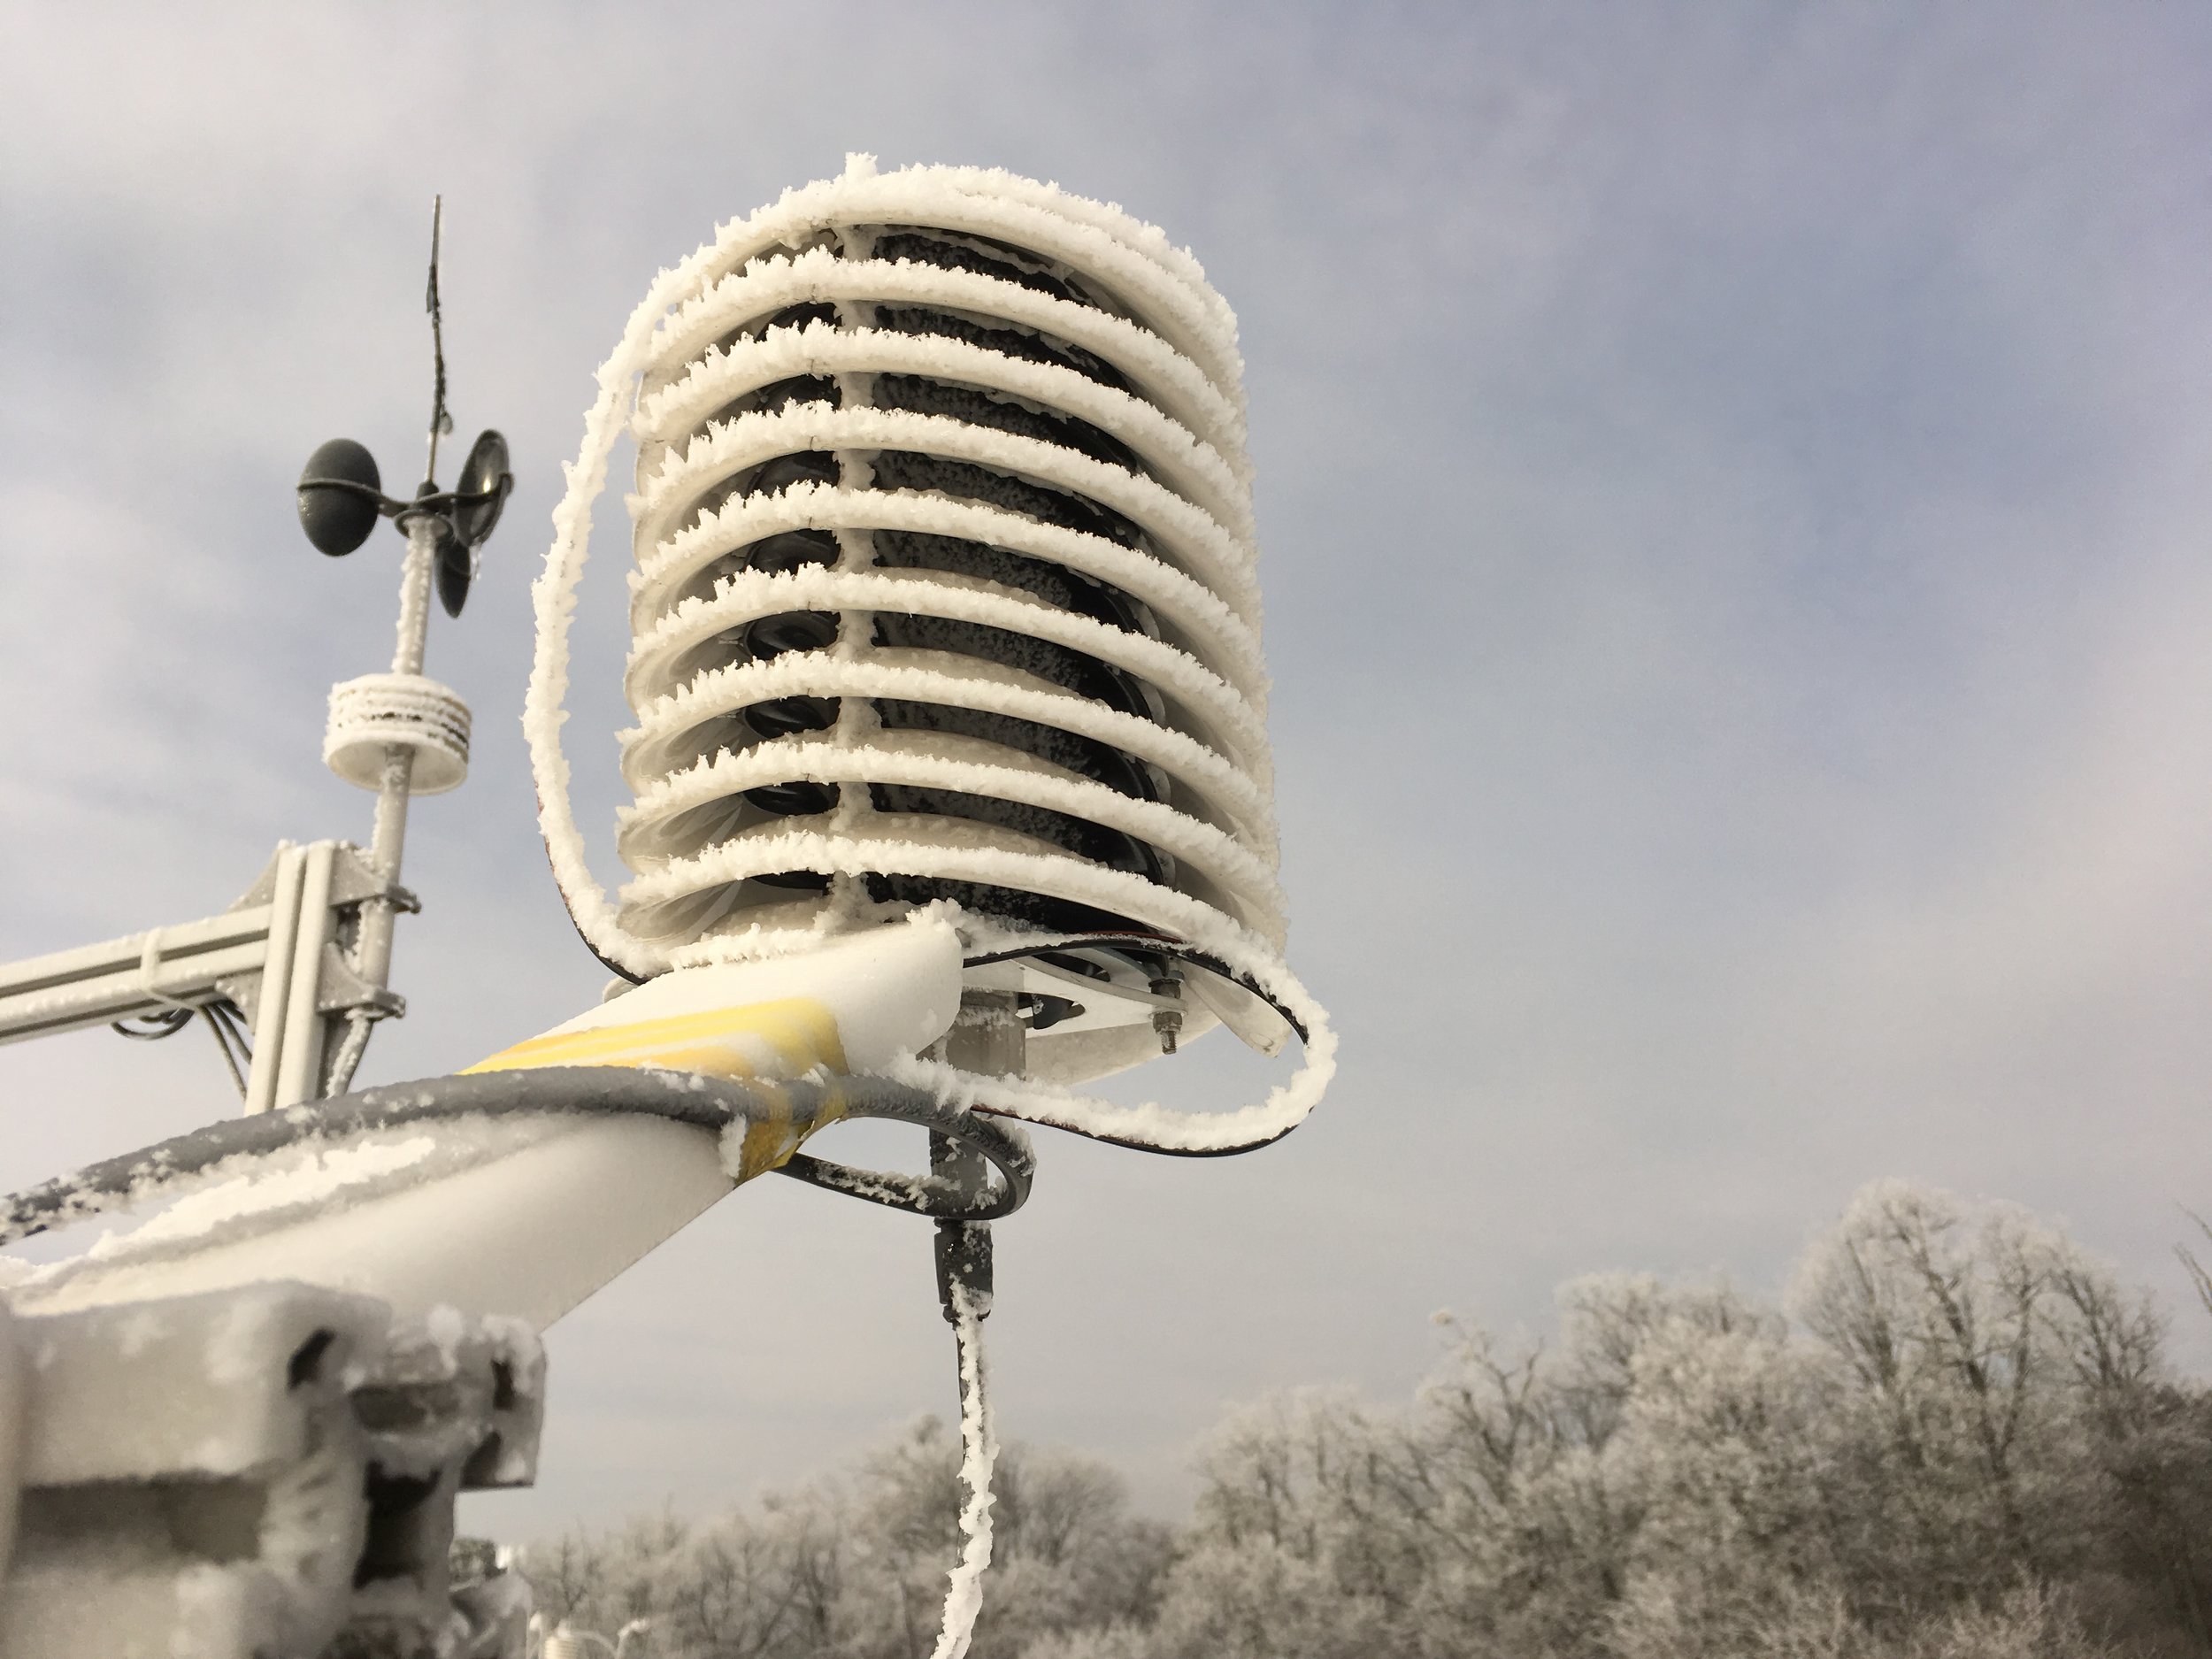 Morning icing covering a BARANI DESIGN weather station in winter